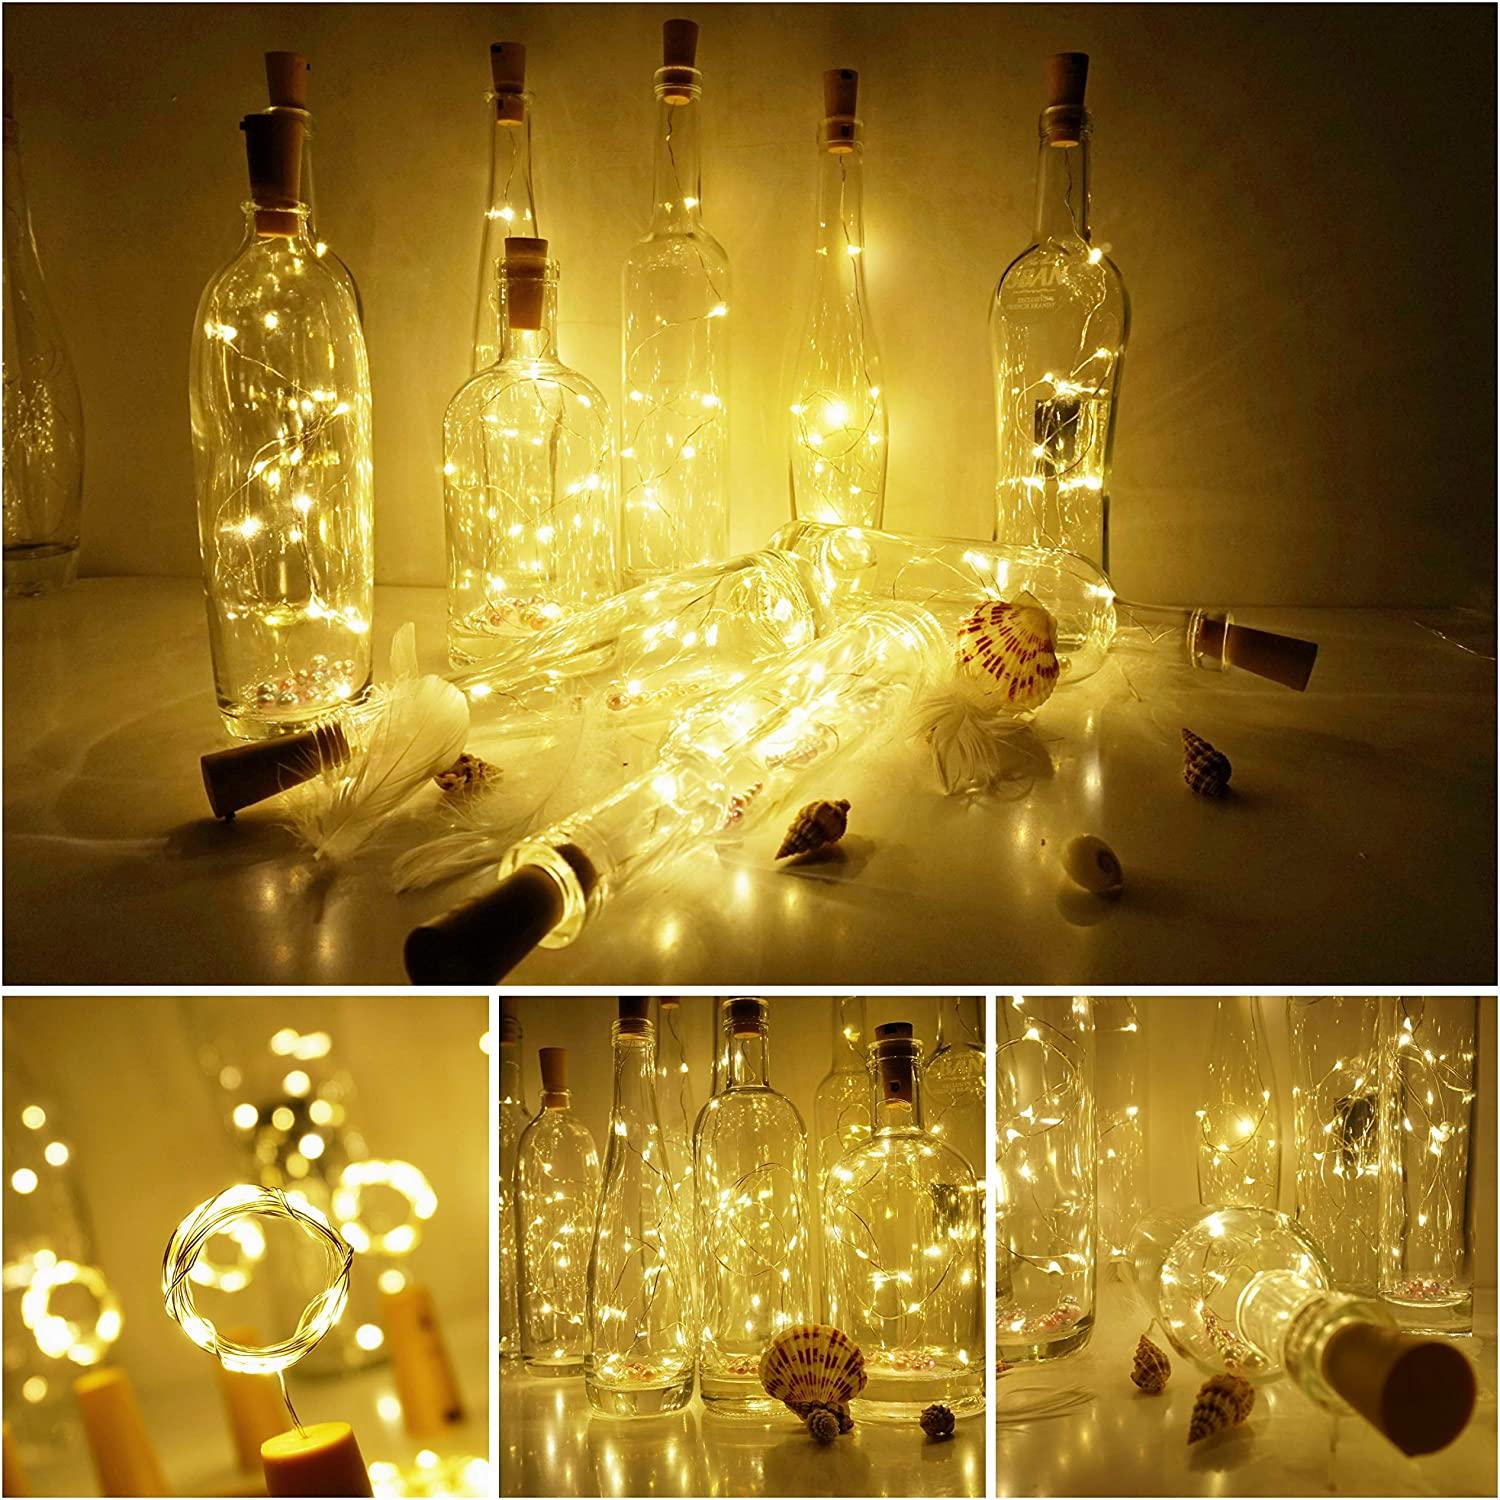 Wine Bottle Cork Lights Colorful Fairy Mini String Lights - If you say i do